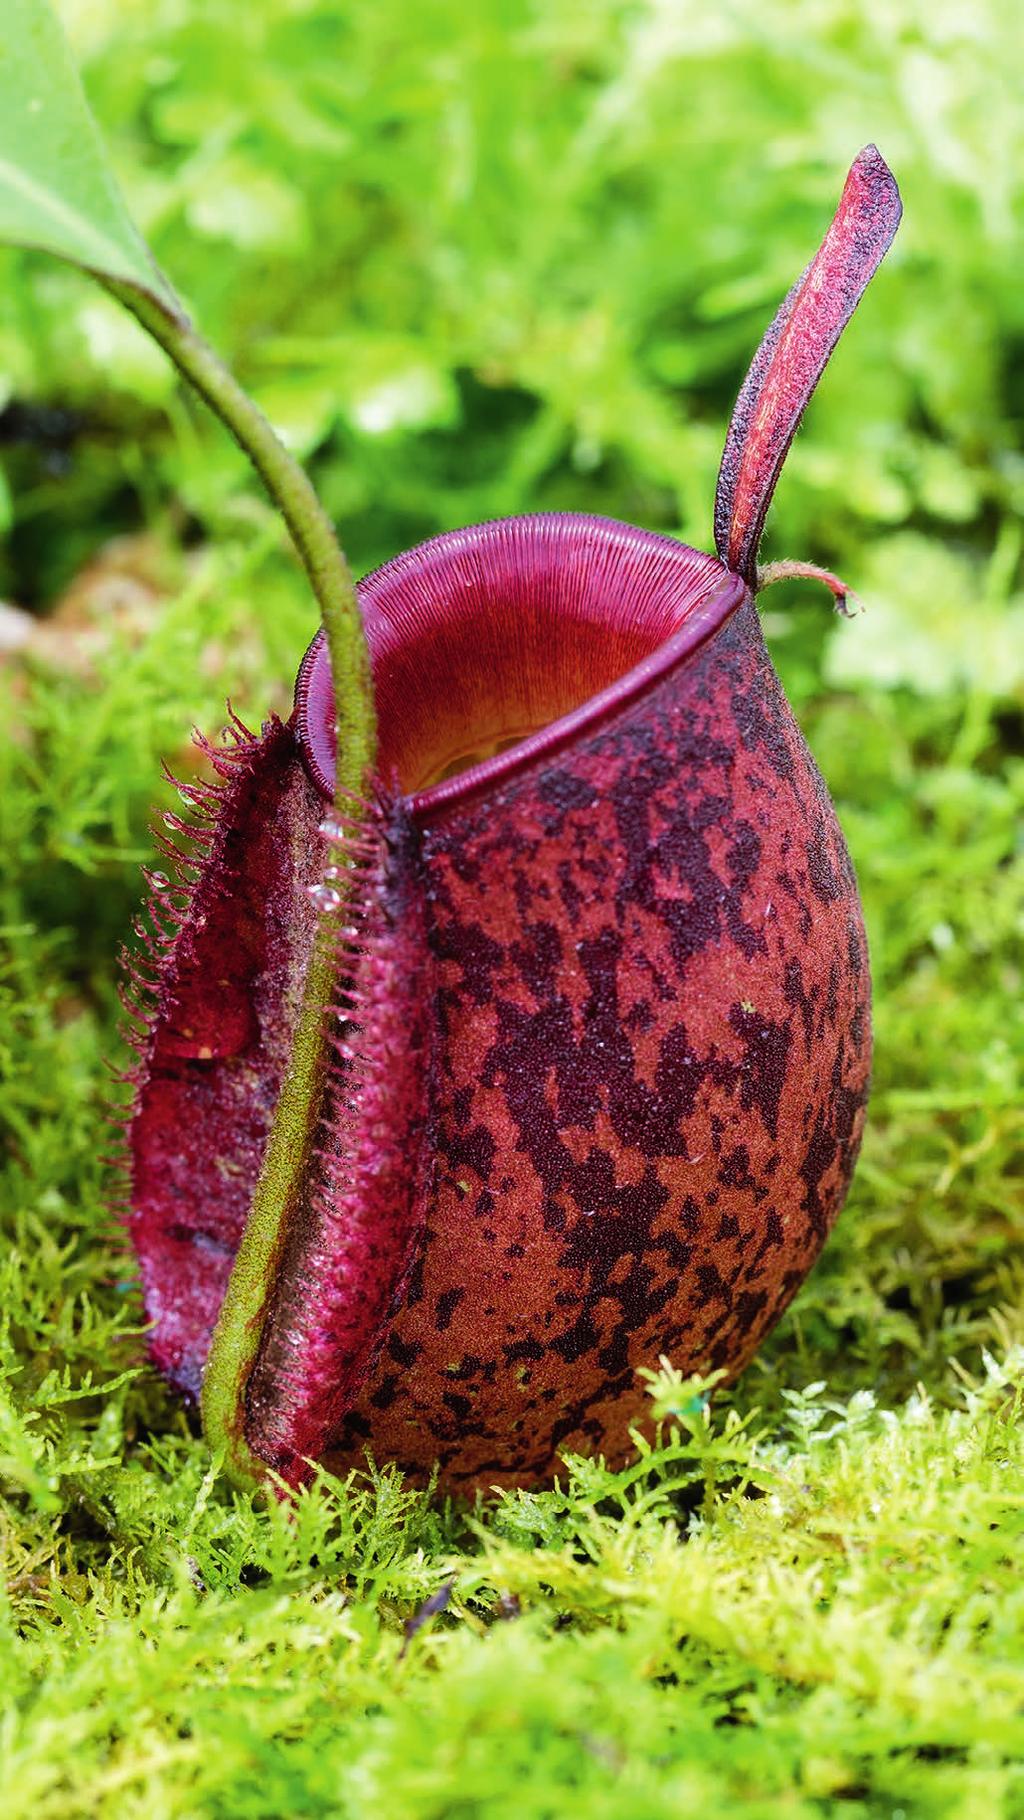 Nepenthes ampullaria Bronze Delight The lower pitchers are a red-bronze color with brown markings and the peristome is the